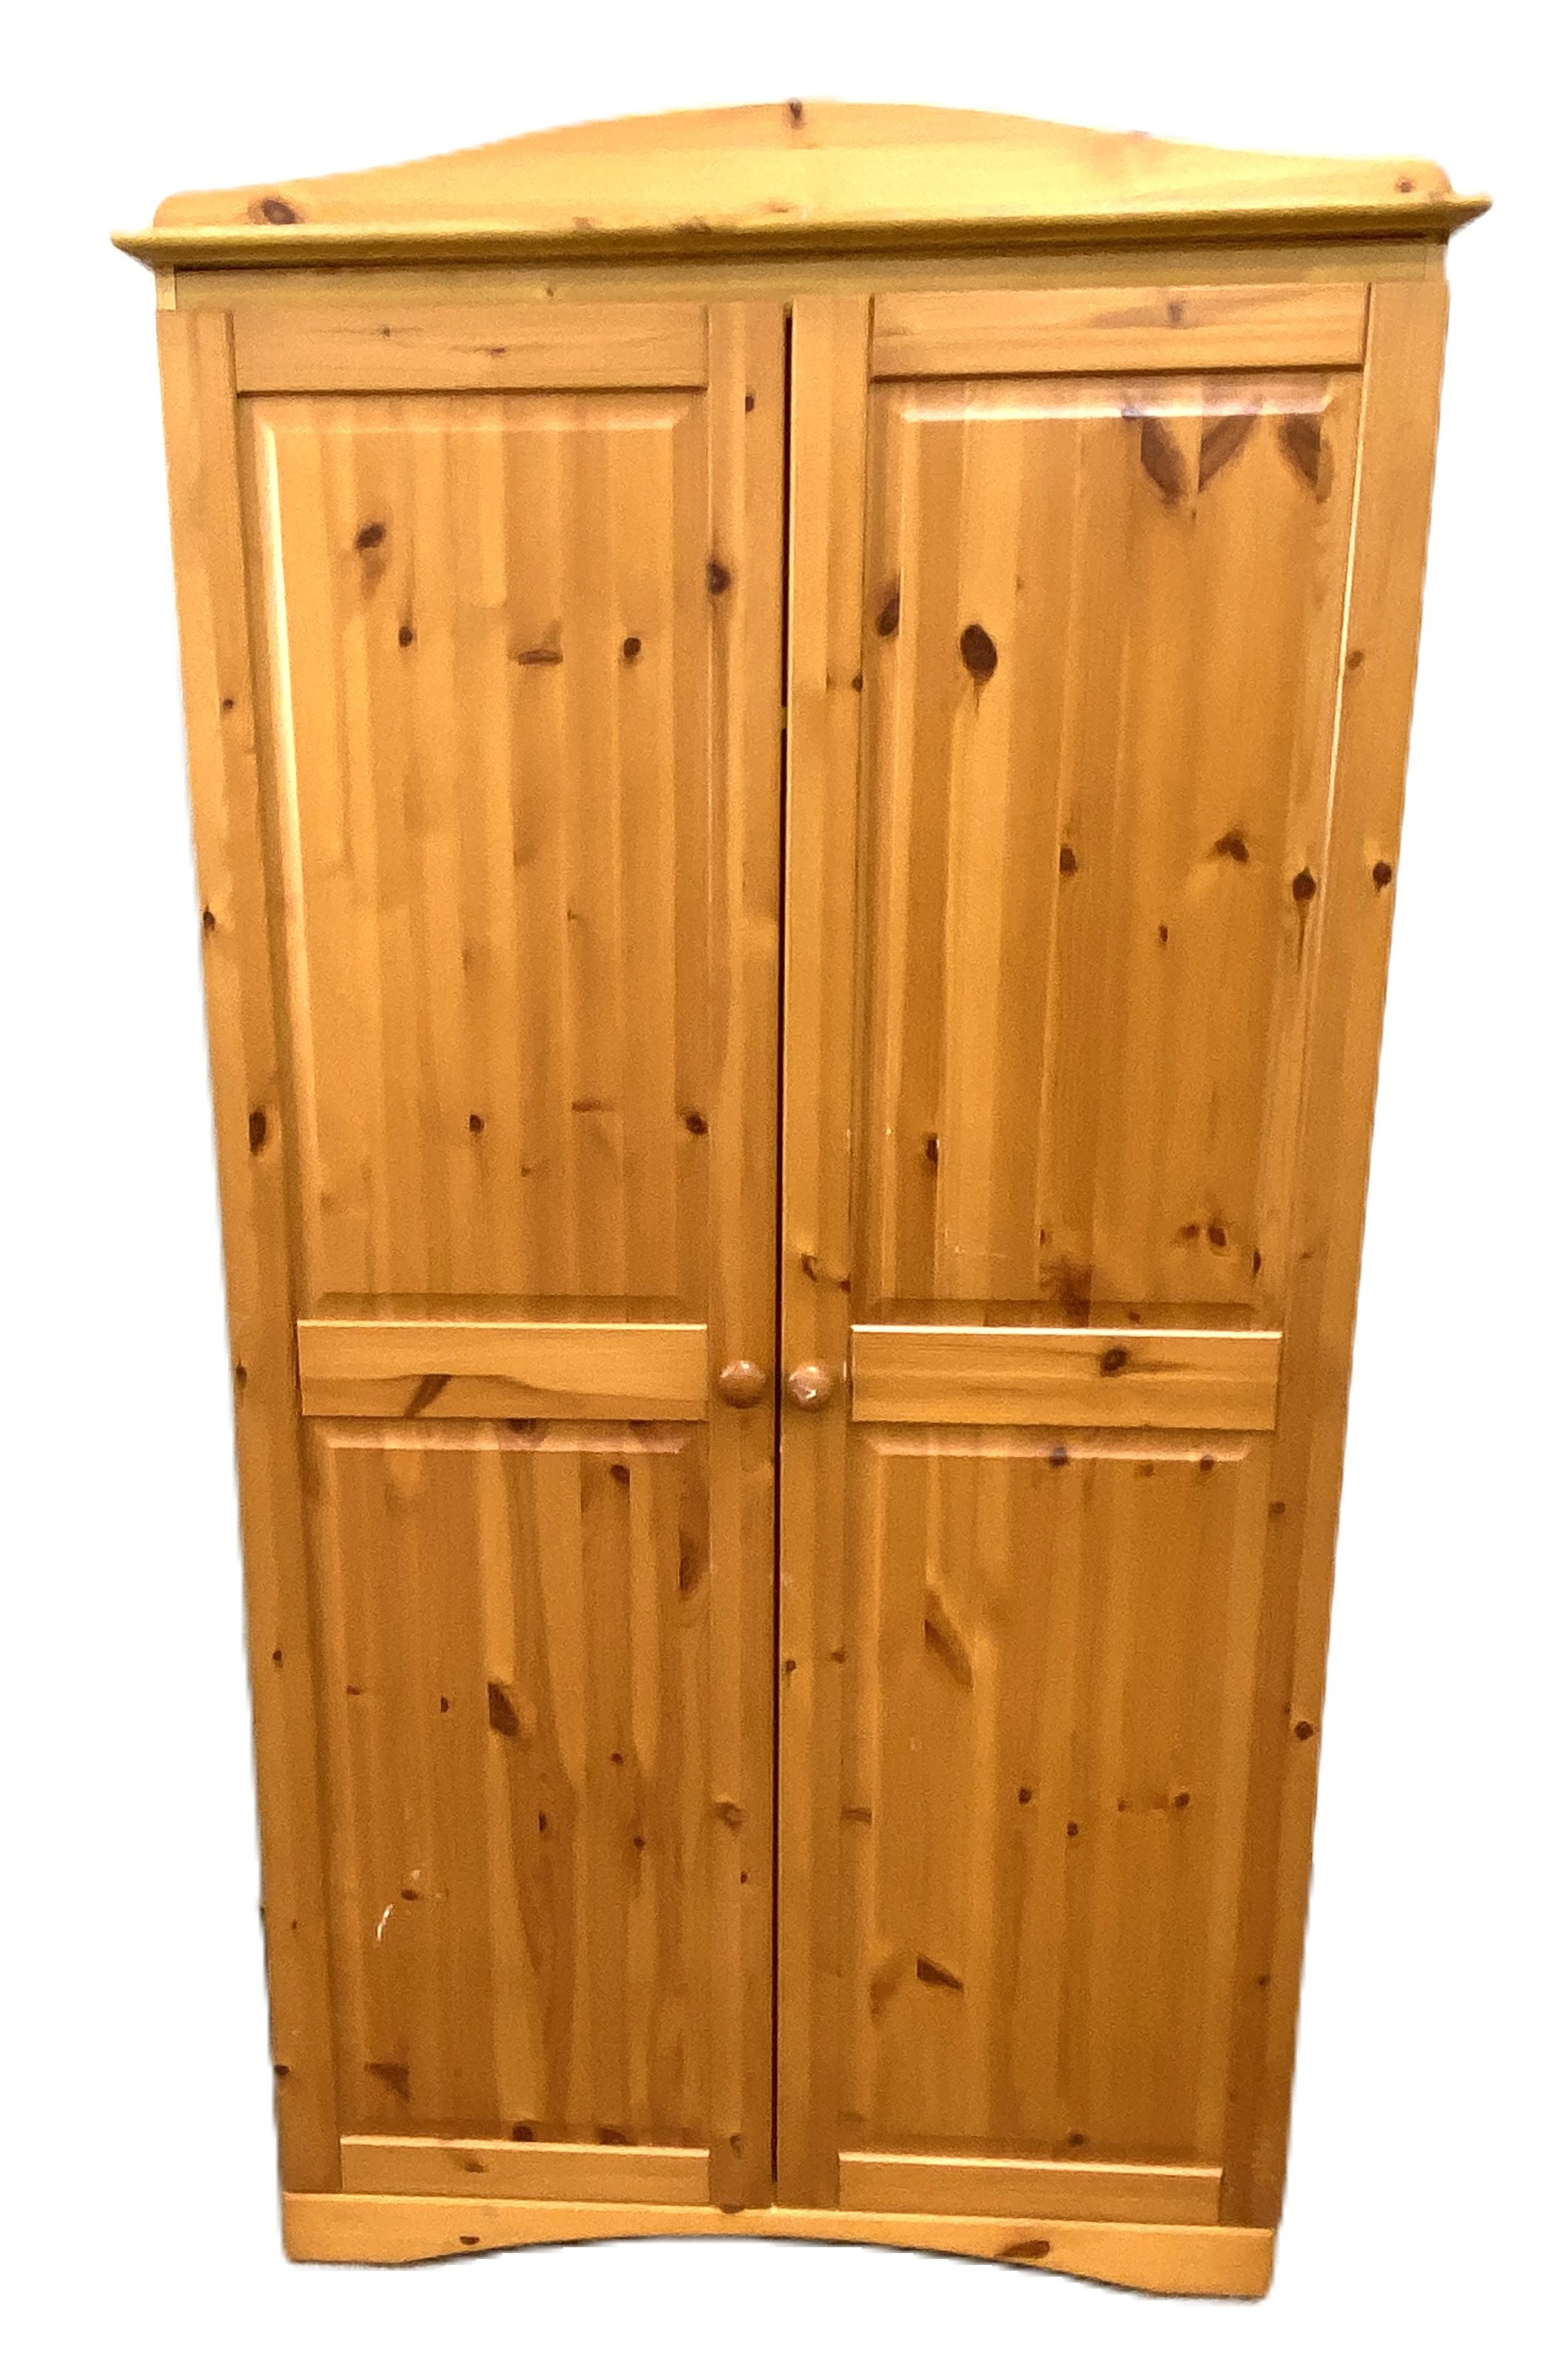 Two modern pine veneered wardrobes, both with two panelled doors, 180cm high (2) - Image 2 of 6